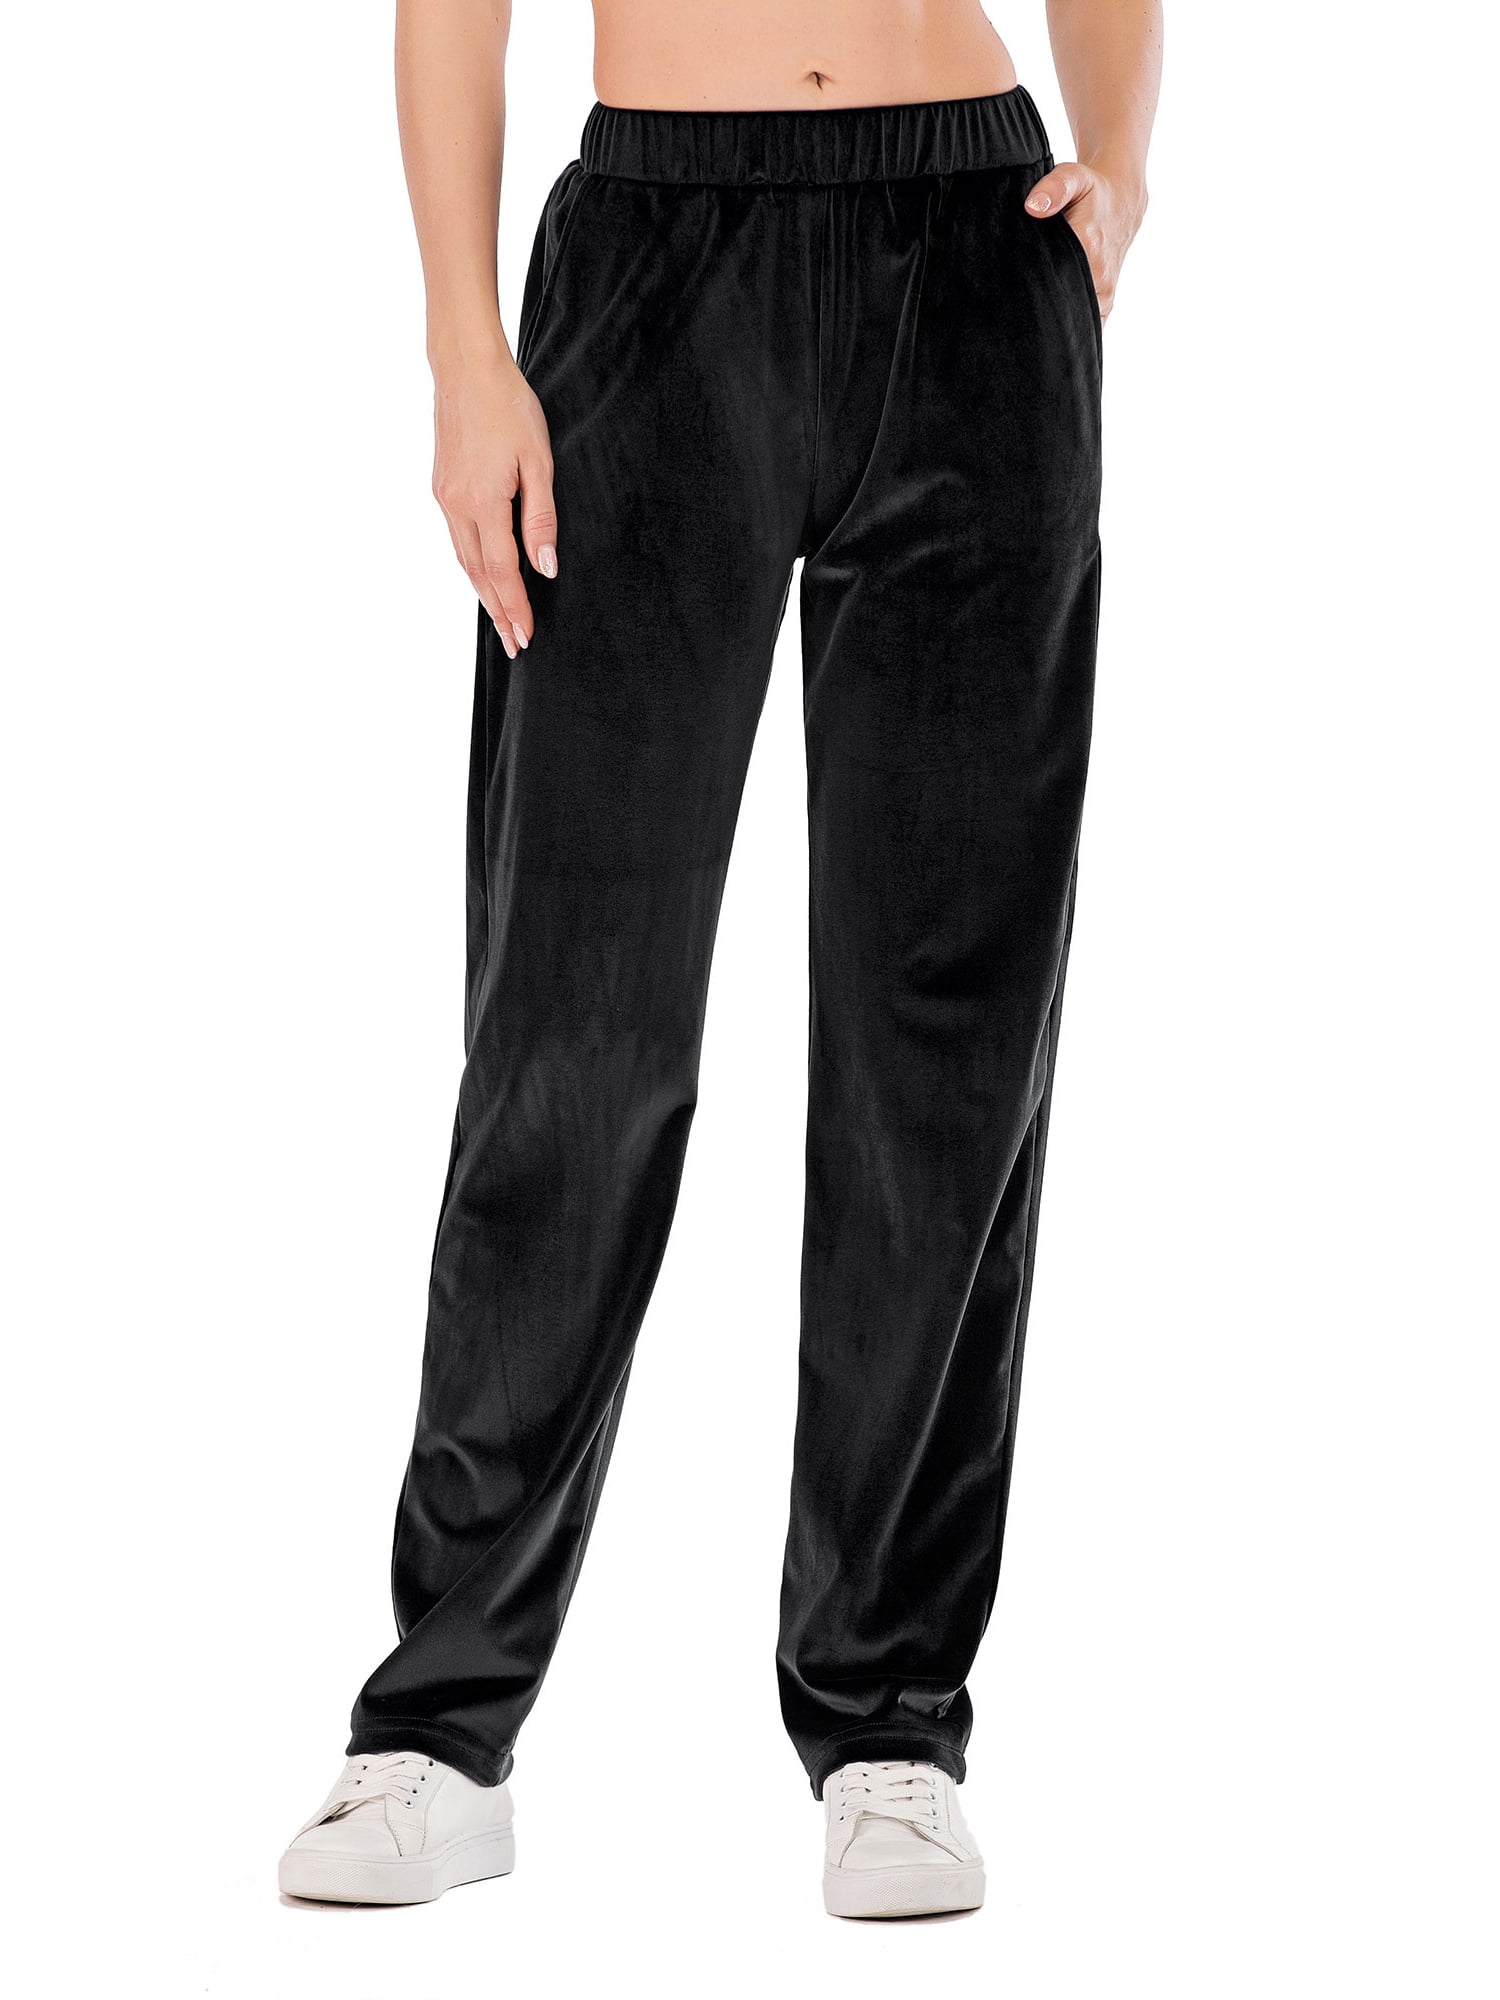 New Womens Crushed Velour Tracksuits Pocket Trouser Bottoms 16-26 